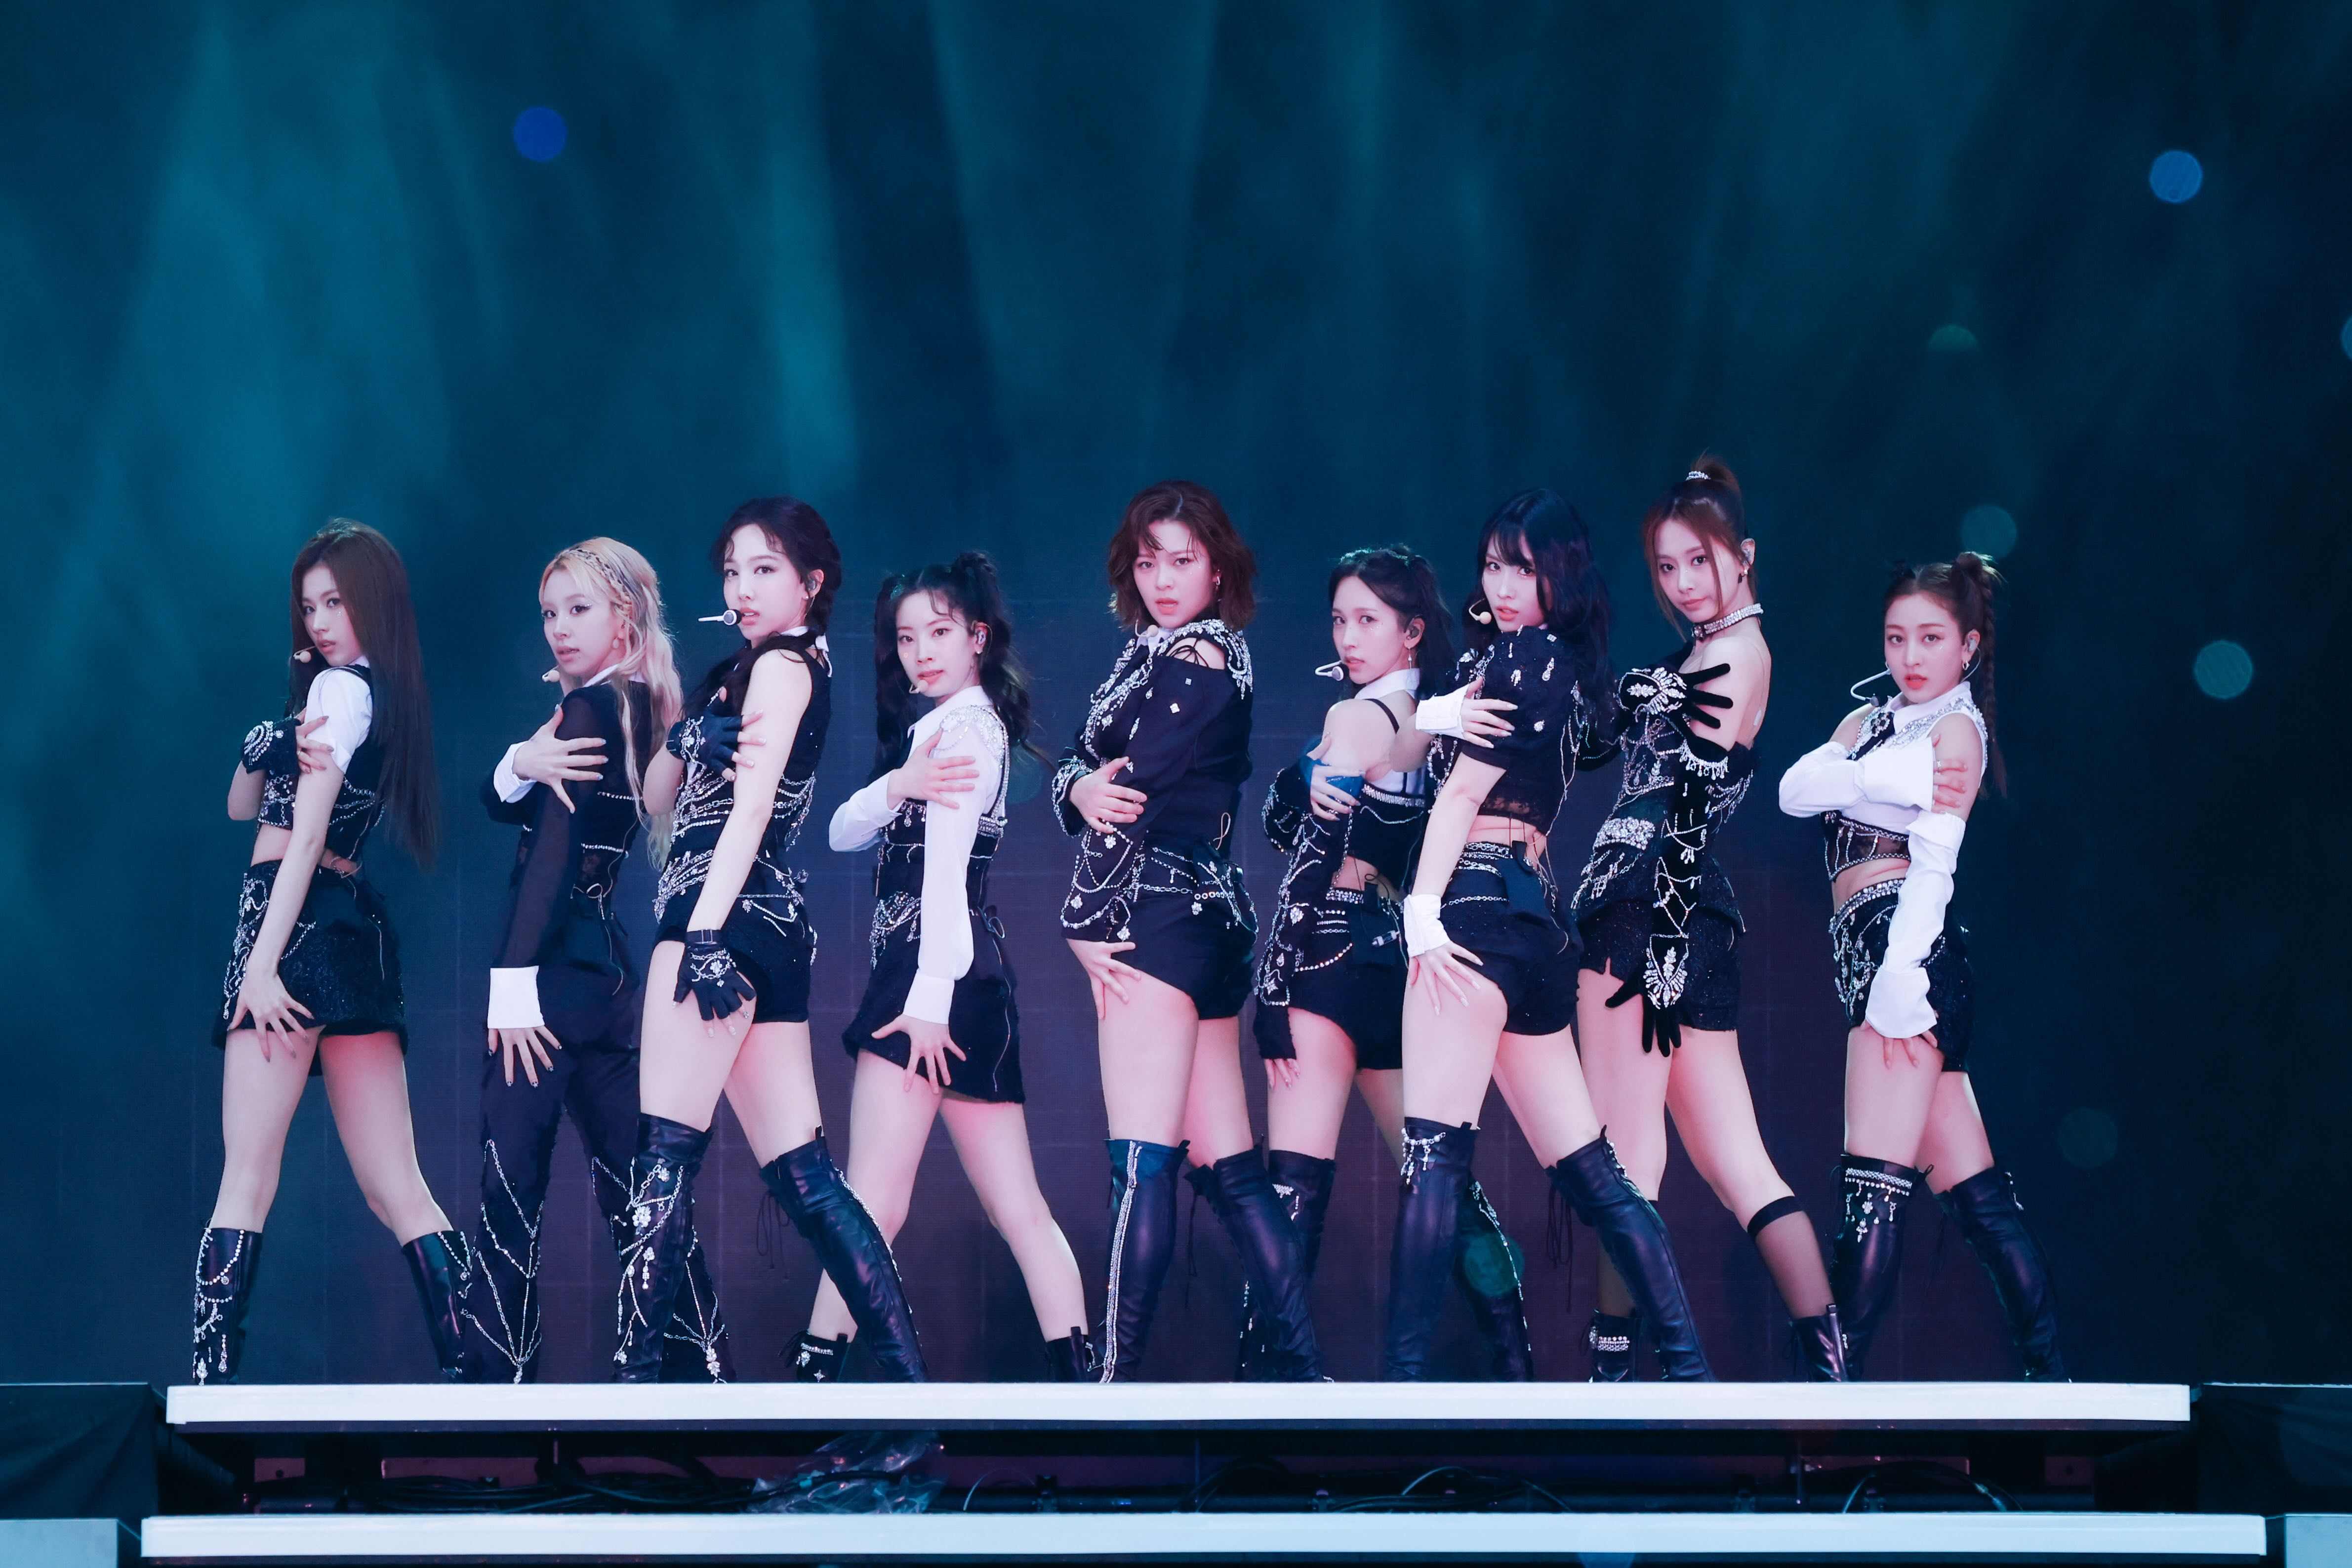 TWICE 5TH WORLD TOUR'READY TO BE'in JAP… 特価商品 - ミュージック